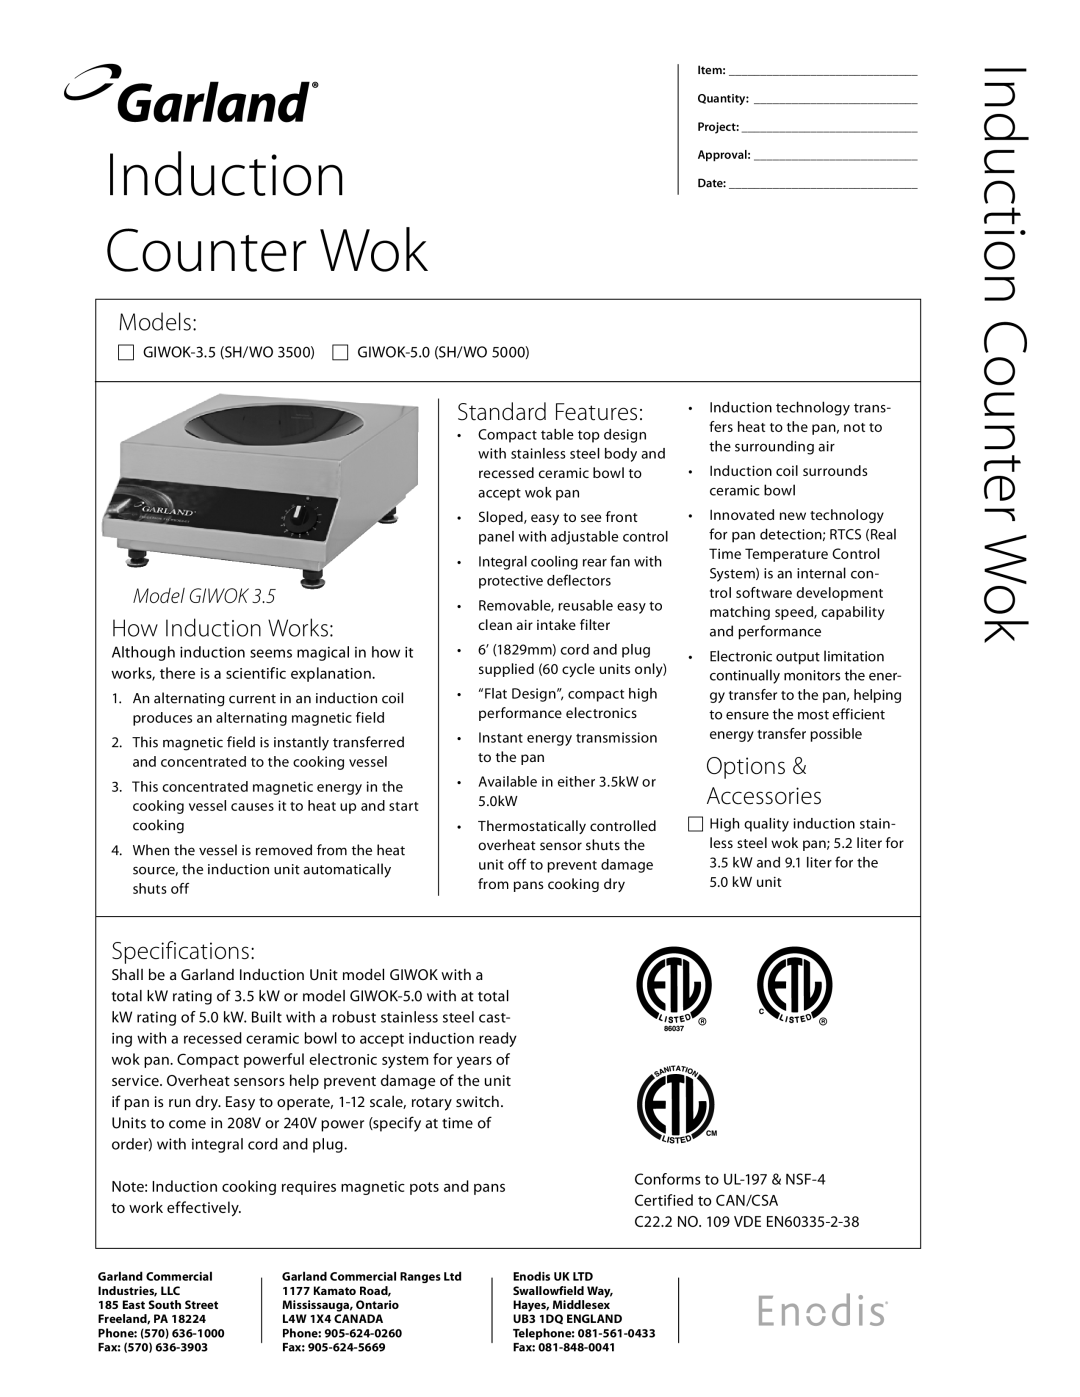 Garland GIWOK-5.0 (SH/WO 5000) specifications Counter Wok, Models, How Induction Works, Standard Features, Model GIWOK 